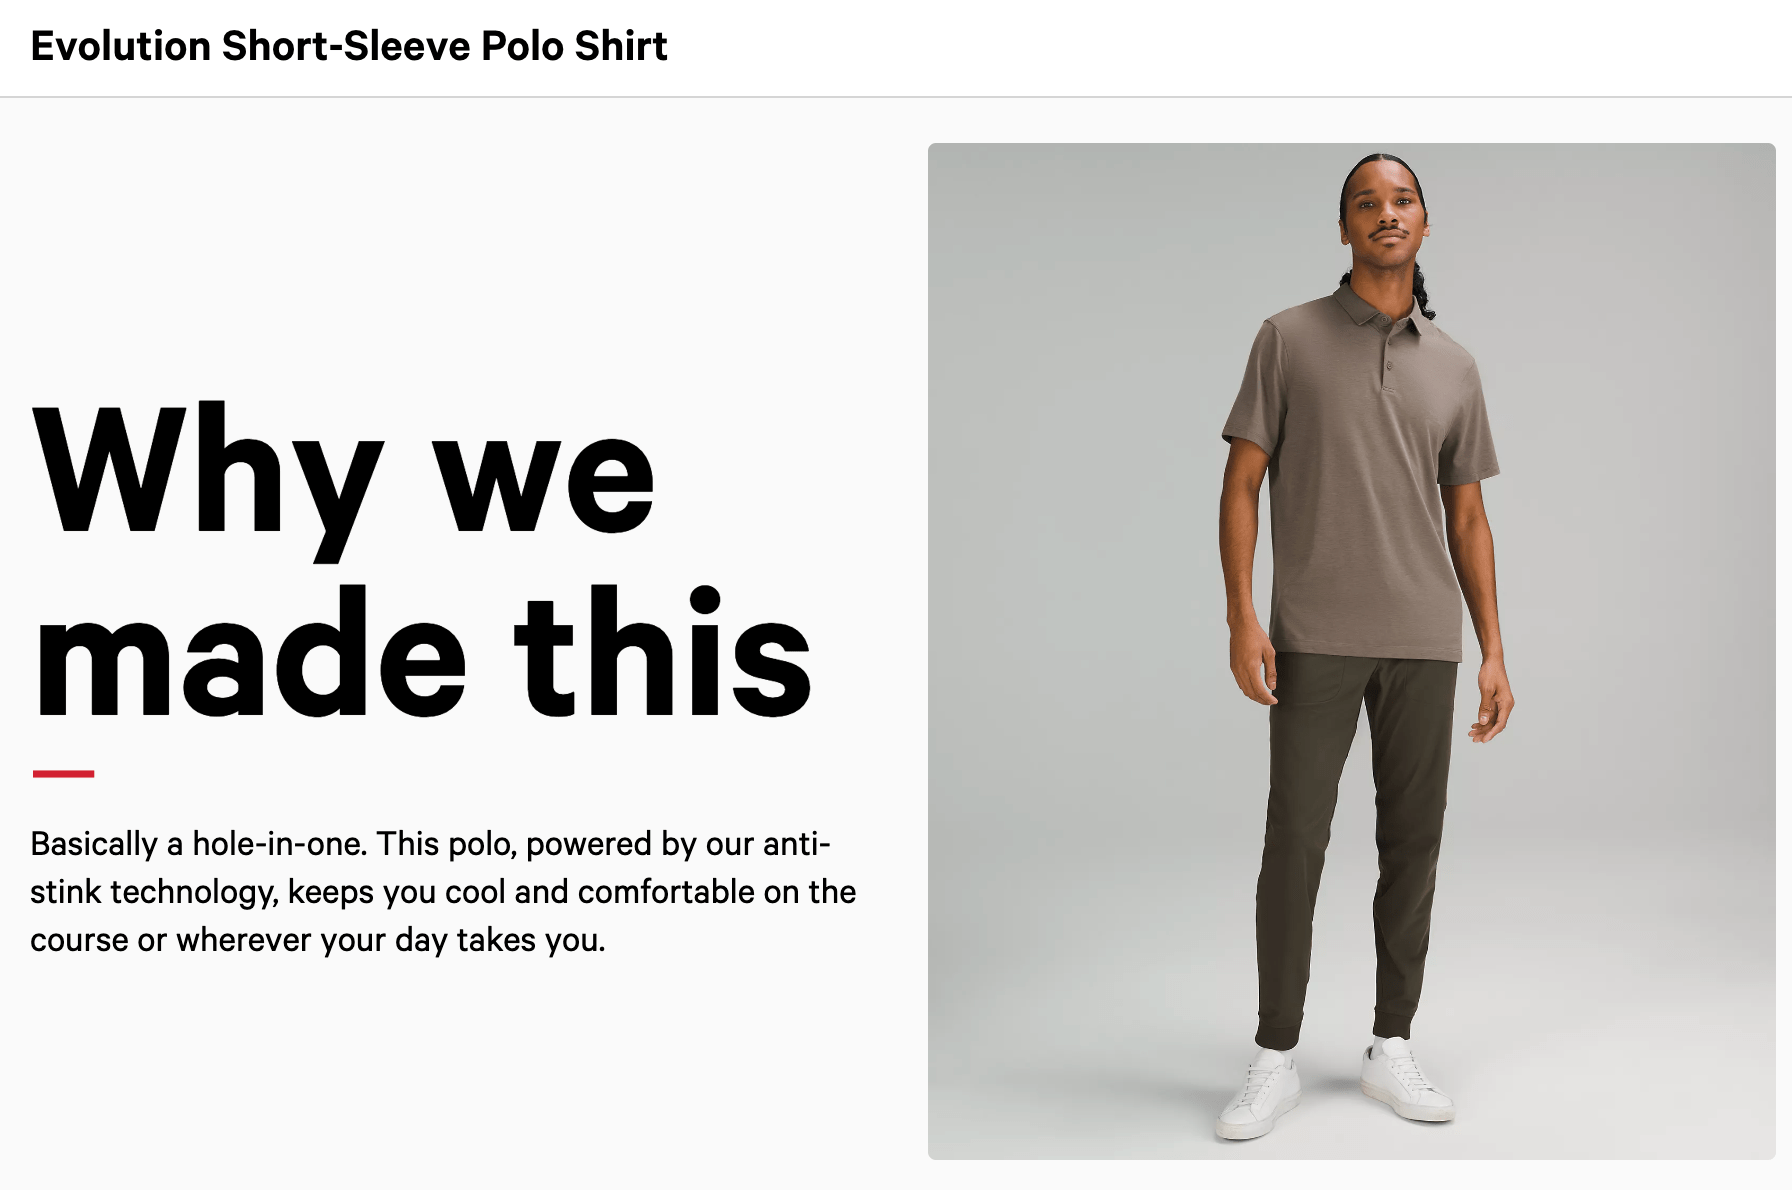 A screenshot from the "why we made this" section of Lululemon's product pages.